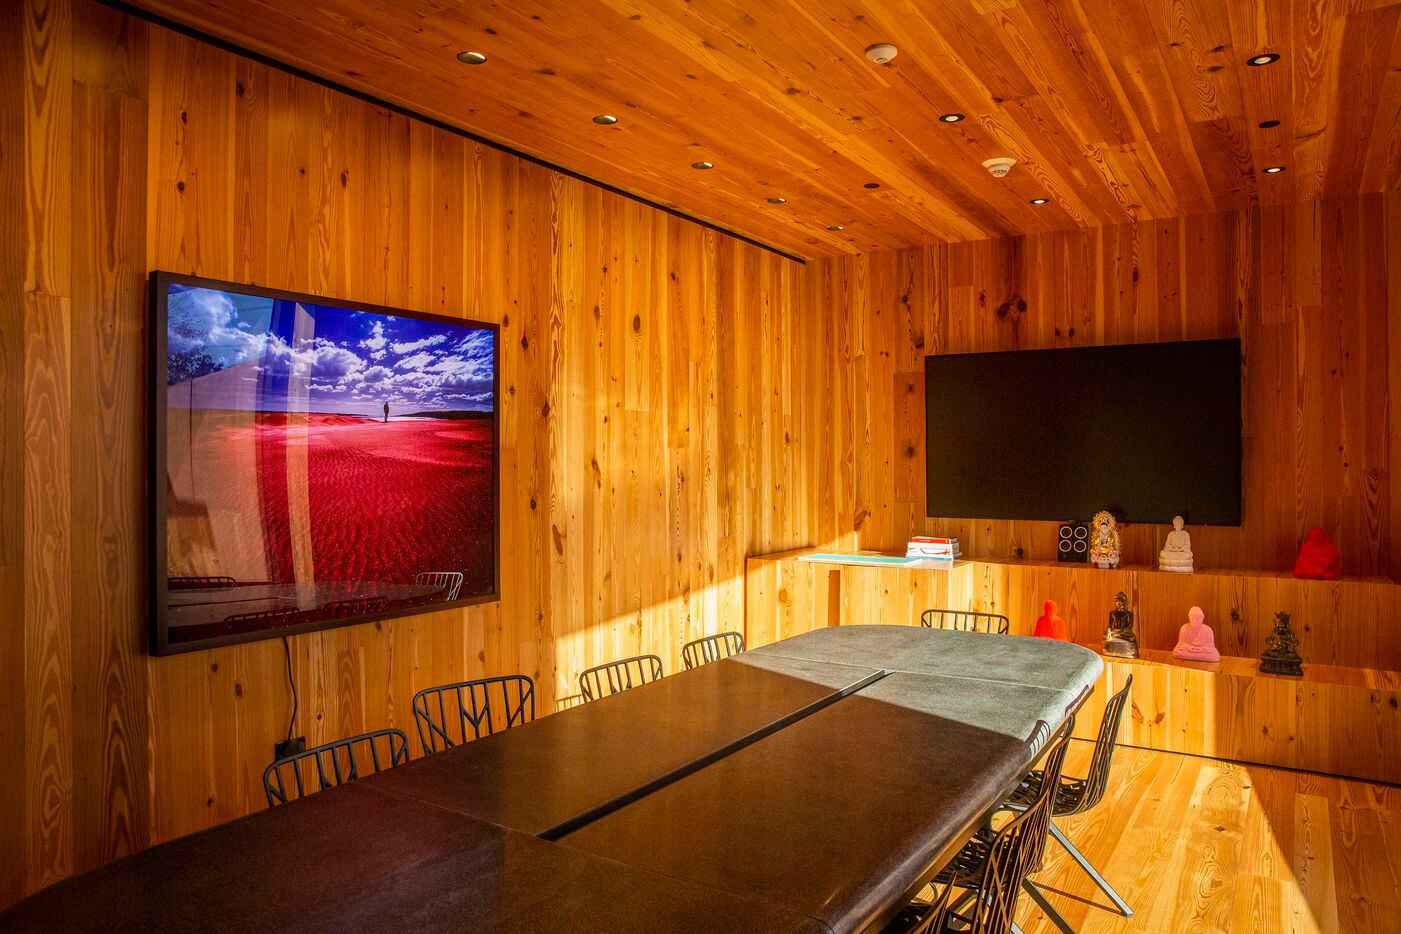 A wood-paneled conference room features a one-ton concrete meeting table and chairs designed...